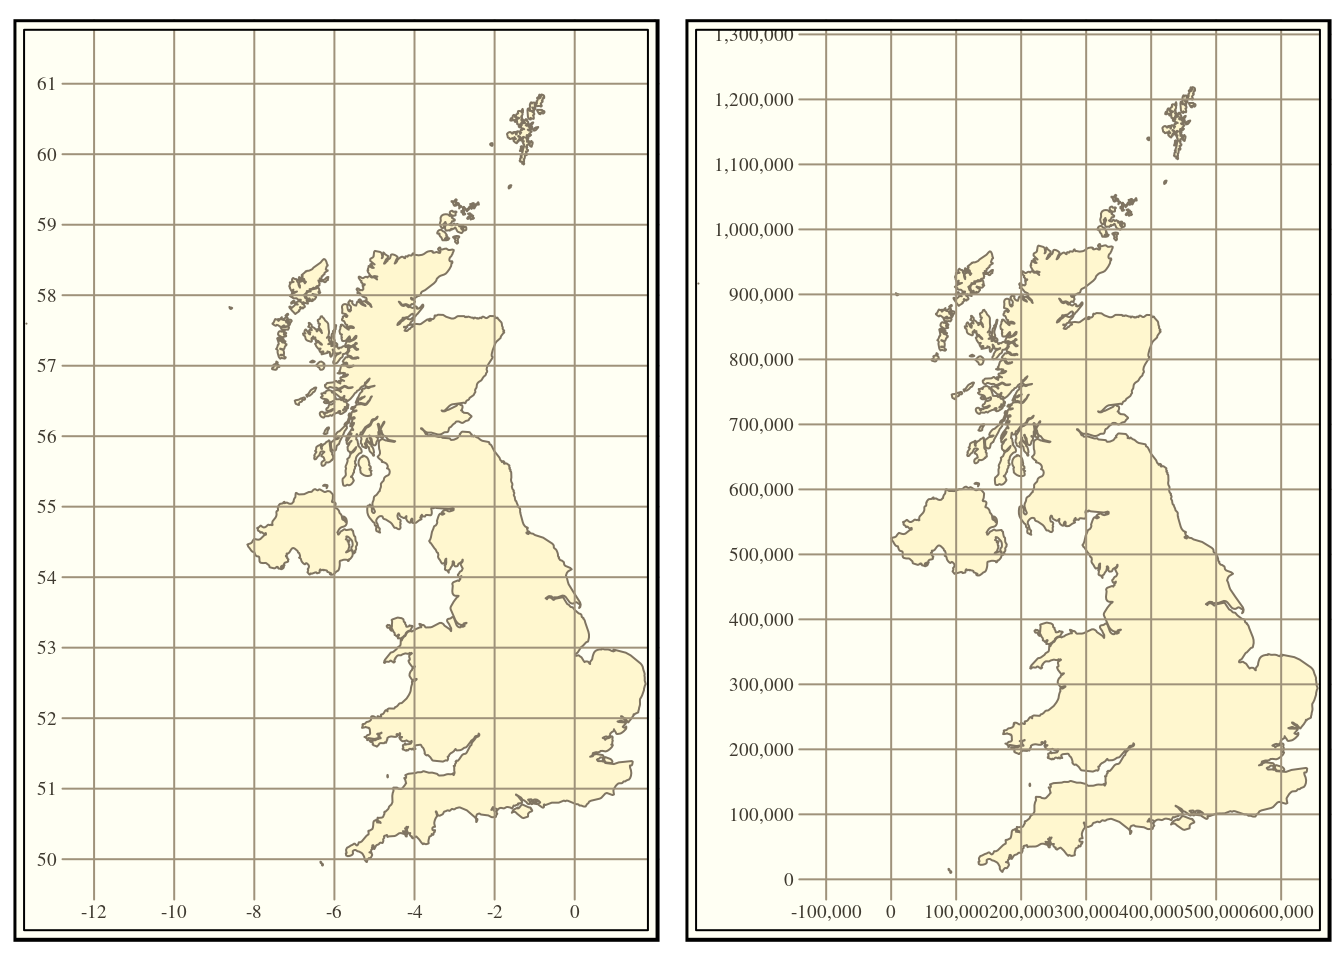 UK displayed using the qtm function in R in unprojectd (EPSG 4326) form and in British National gid (EPSG 27700). Note that because the map making package aims to keep the aspect ratio constant the maps look very similar, apart from the grid coordinate values.